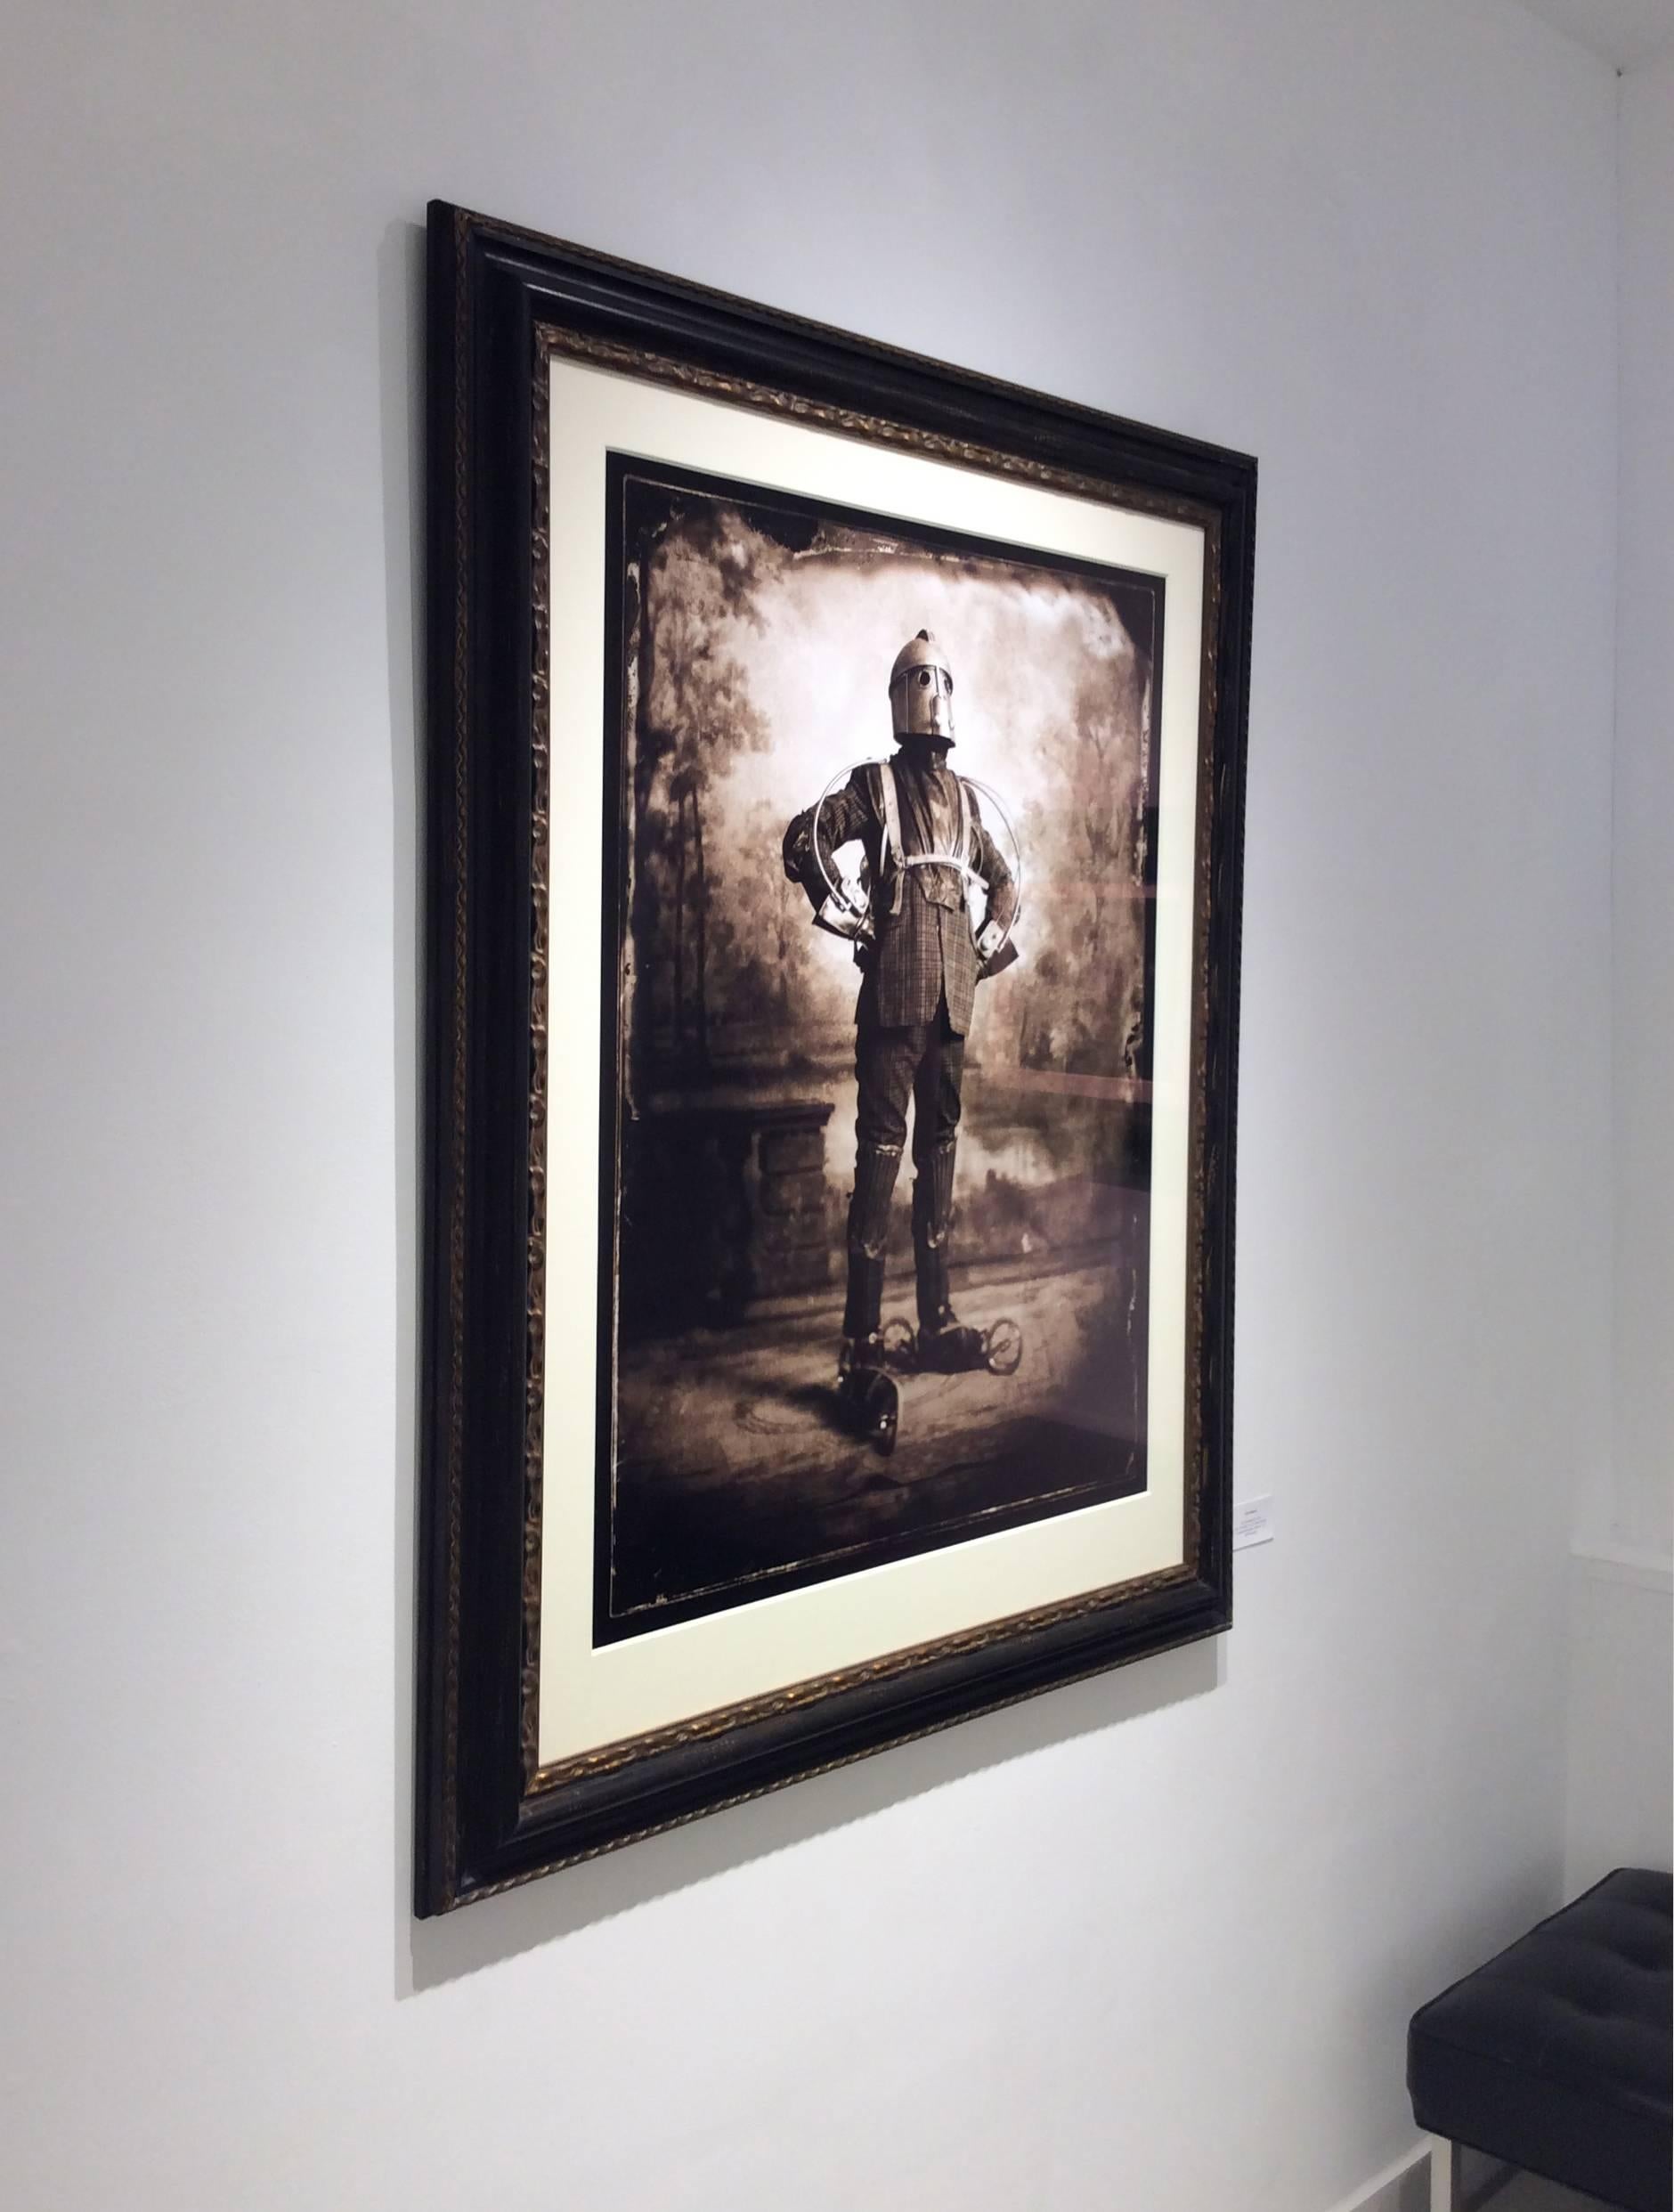 C-type archival print, edition 1 of 3
40 x 30 inches unframed
54 x 43 inches in ornate wood frame with engraved gold detail

This antique style figurative photograph was created by London based photographer, Nick Simpson, in 2012. Here, the artist